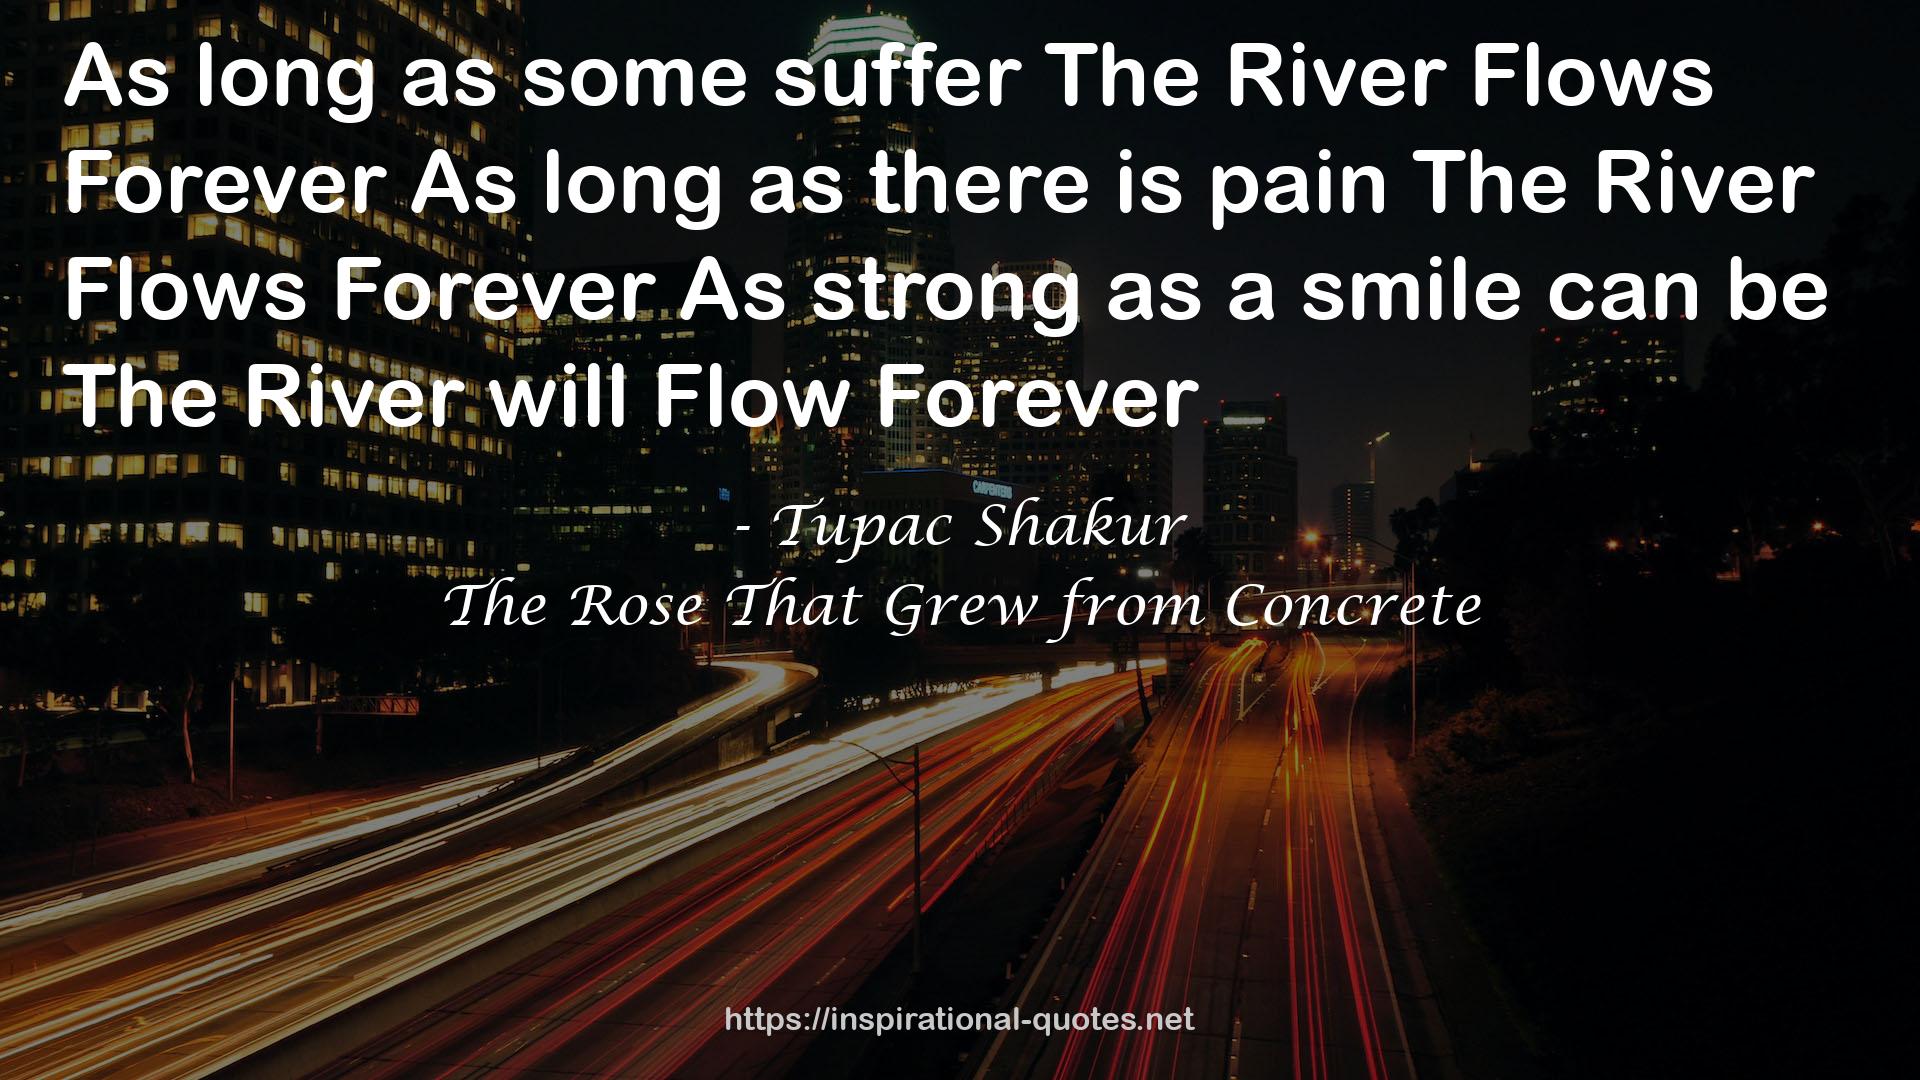 sufferThe River Flows ForeverAs  QUOTES